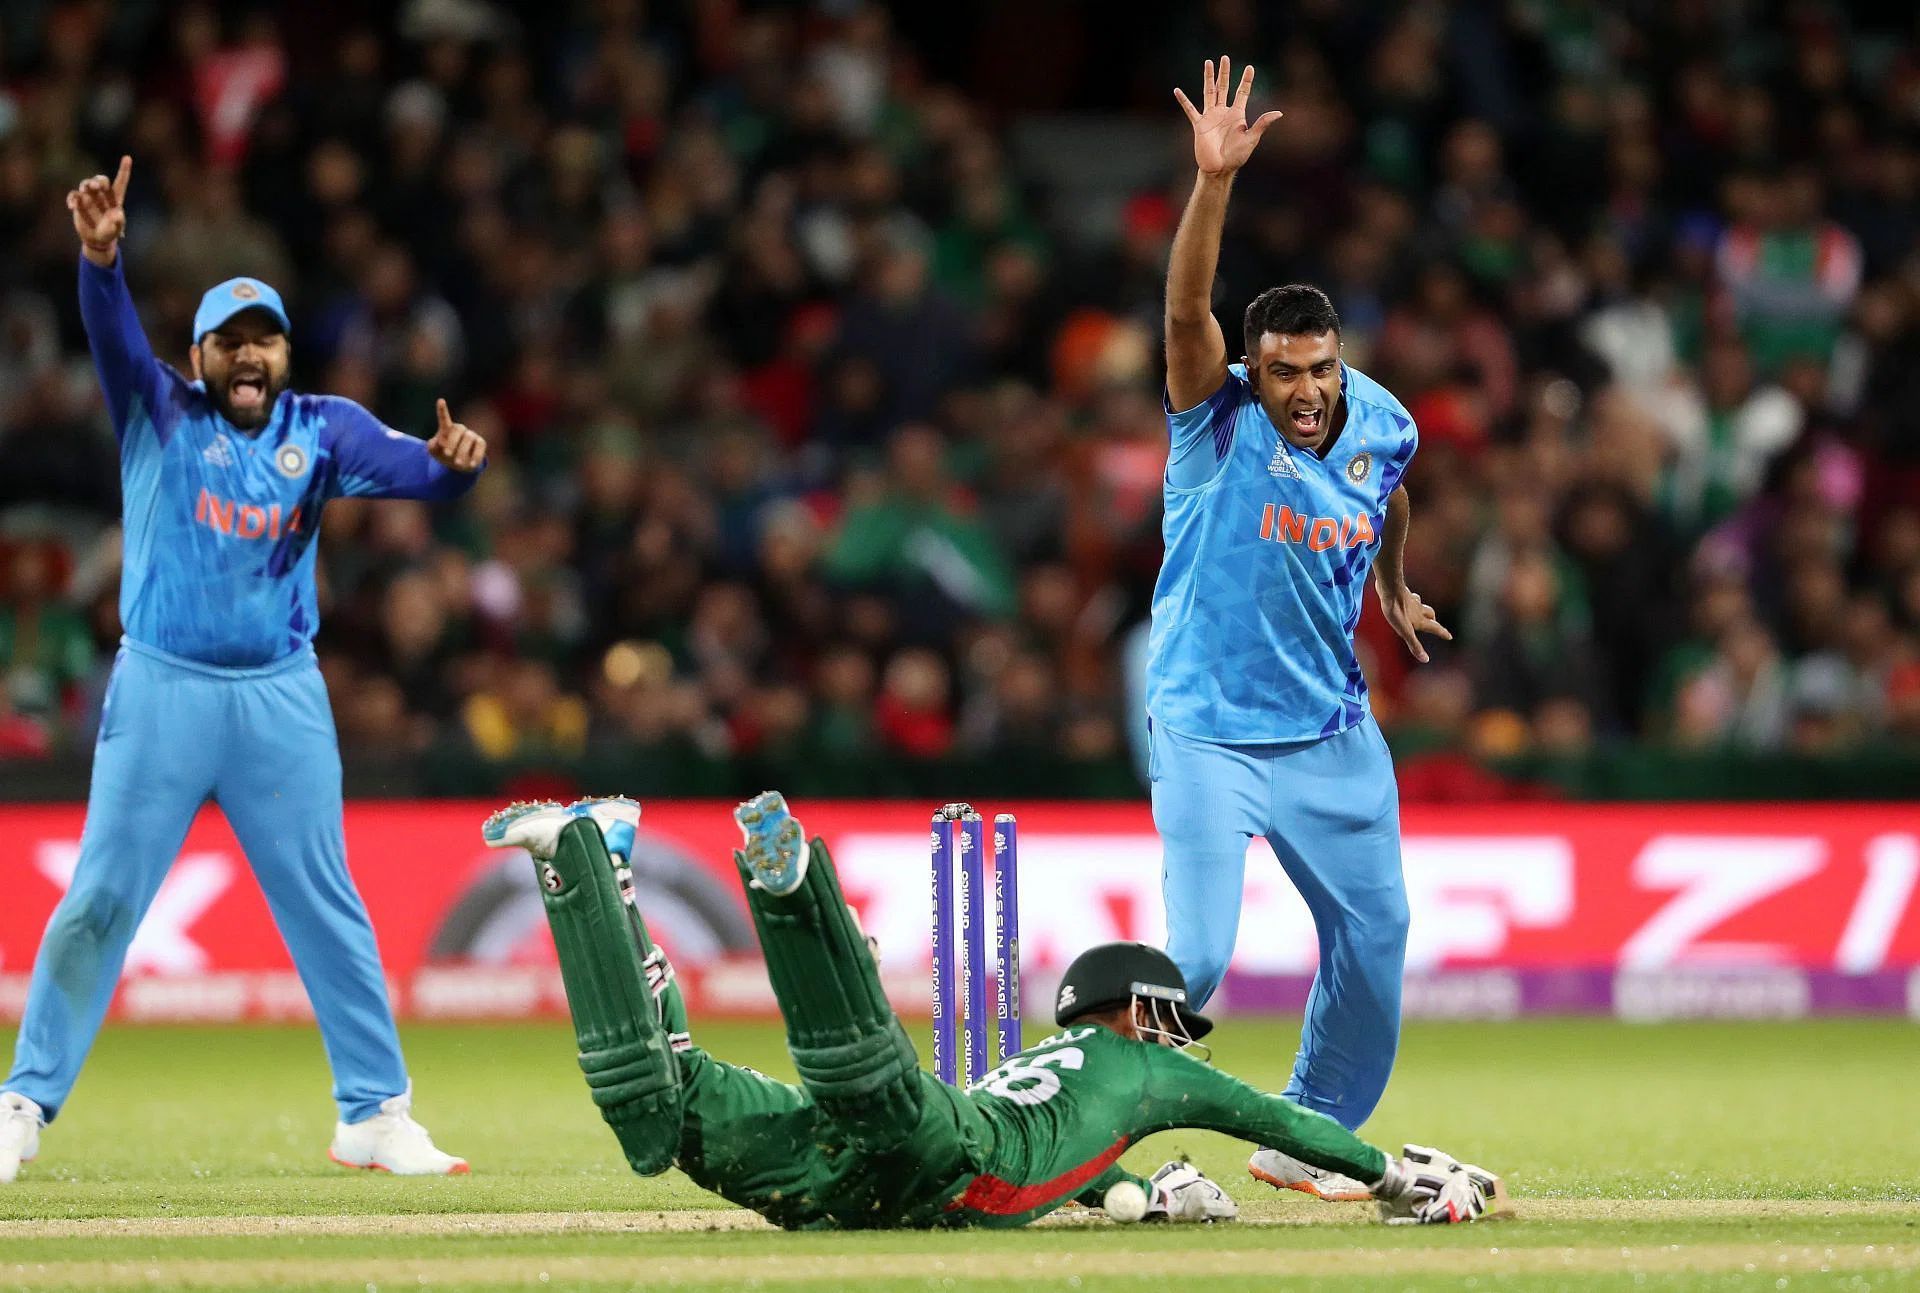 In the field, Rahul (not in picture) affected a brilliant run-out via a direct hit that ended Litton Das&rsquo; spectacular innings. The Bangladesh opener clubbed 60 off only 27 balls. His dismissal, however, proved to be the turning point in the game as Team India fought back. Pic: Getty Images